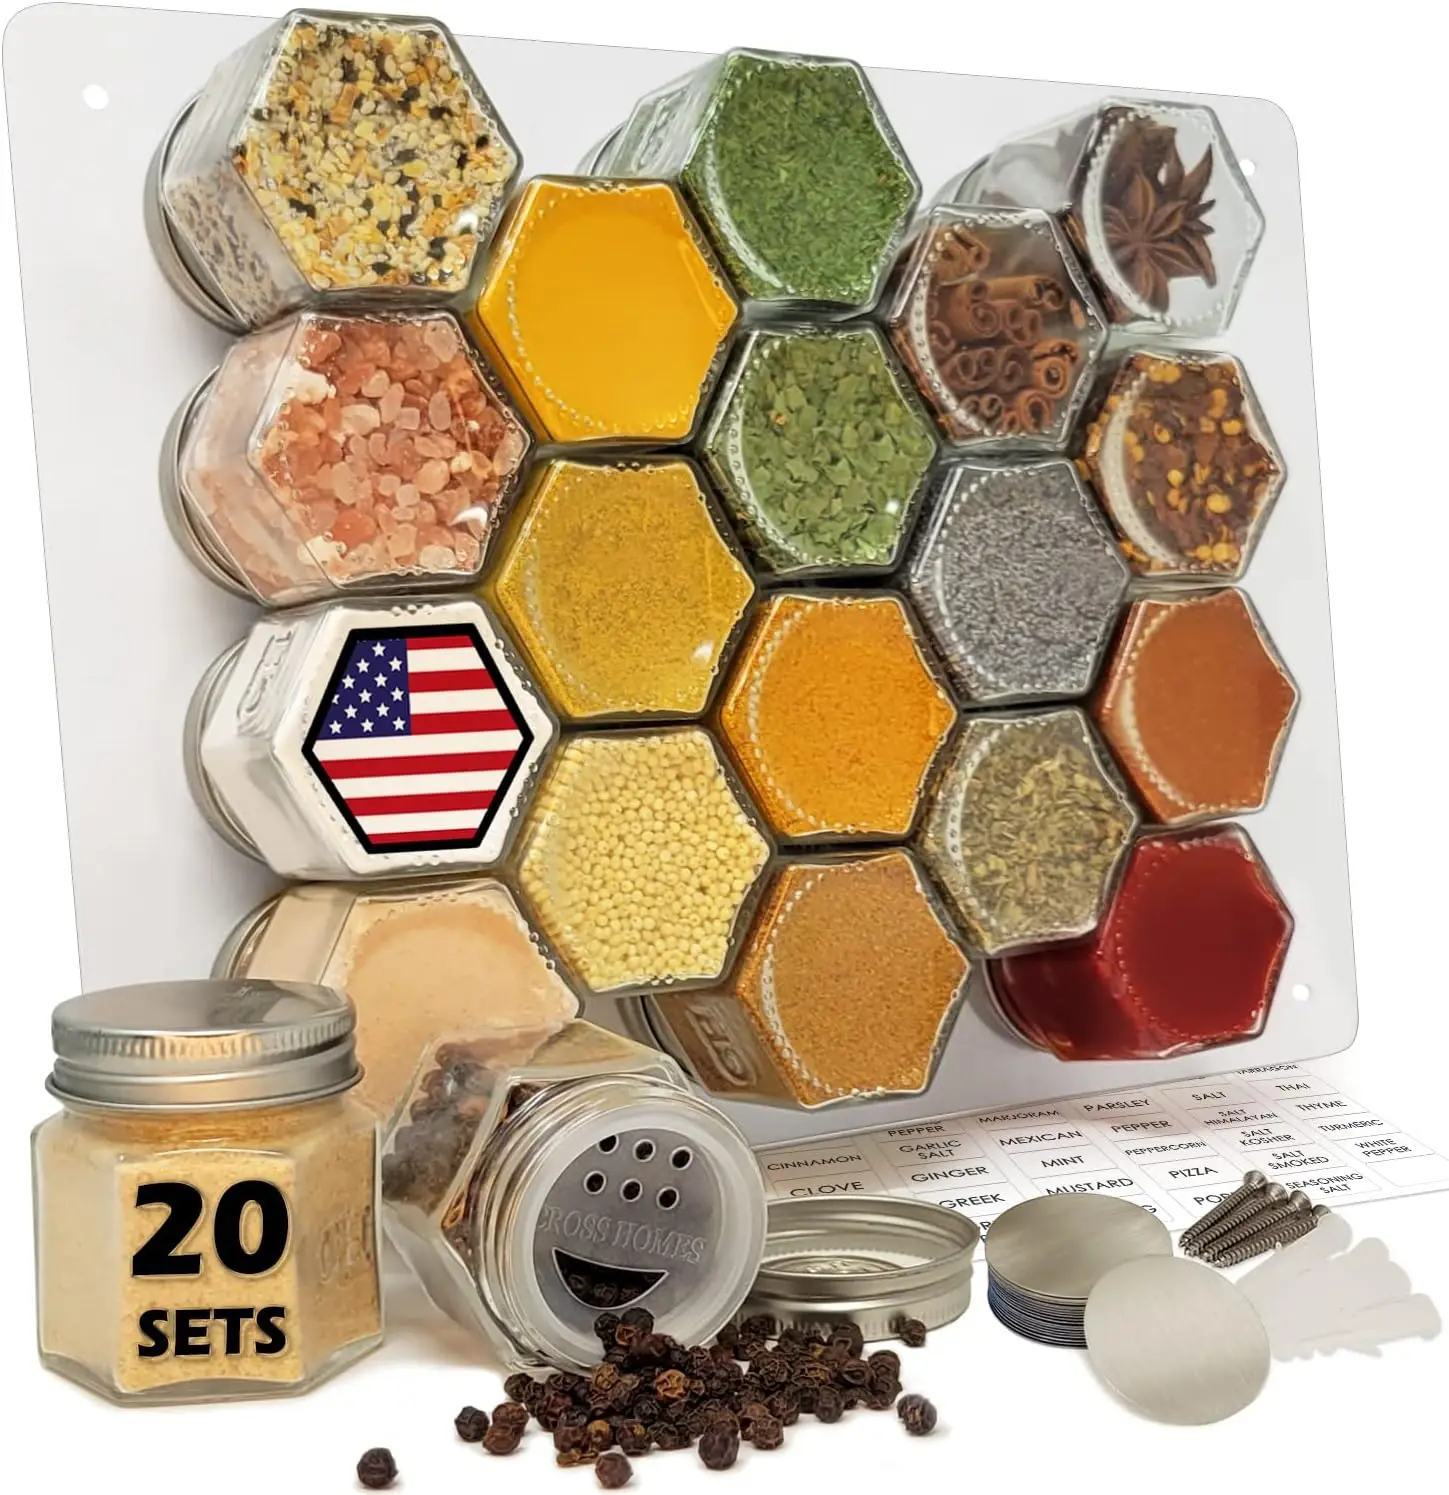 

Small Hexagon Glass Spice Jars 20 Sets with magnetic Lids, Shaker, Board, Spice Labels DIY Spice Tins/ for Refrigerator Fridge